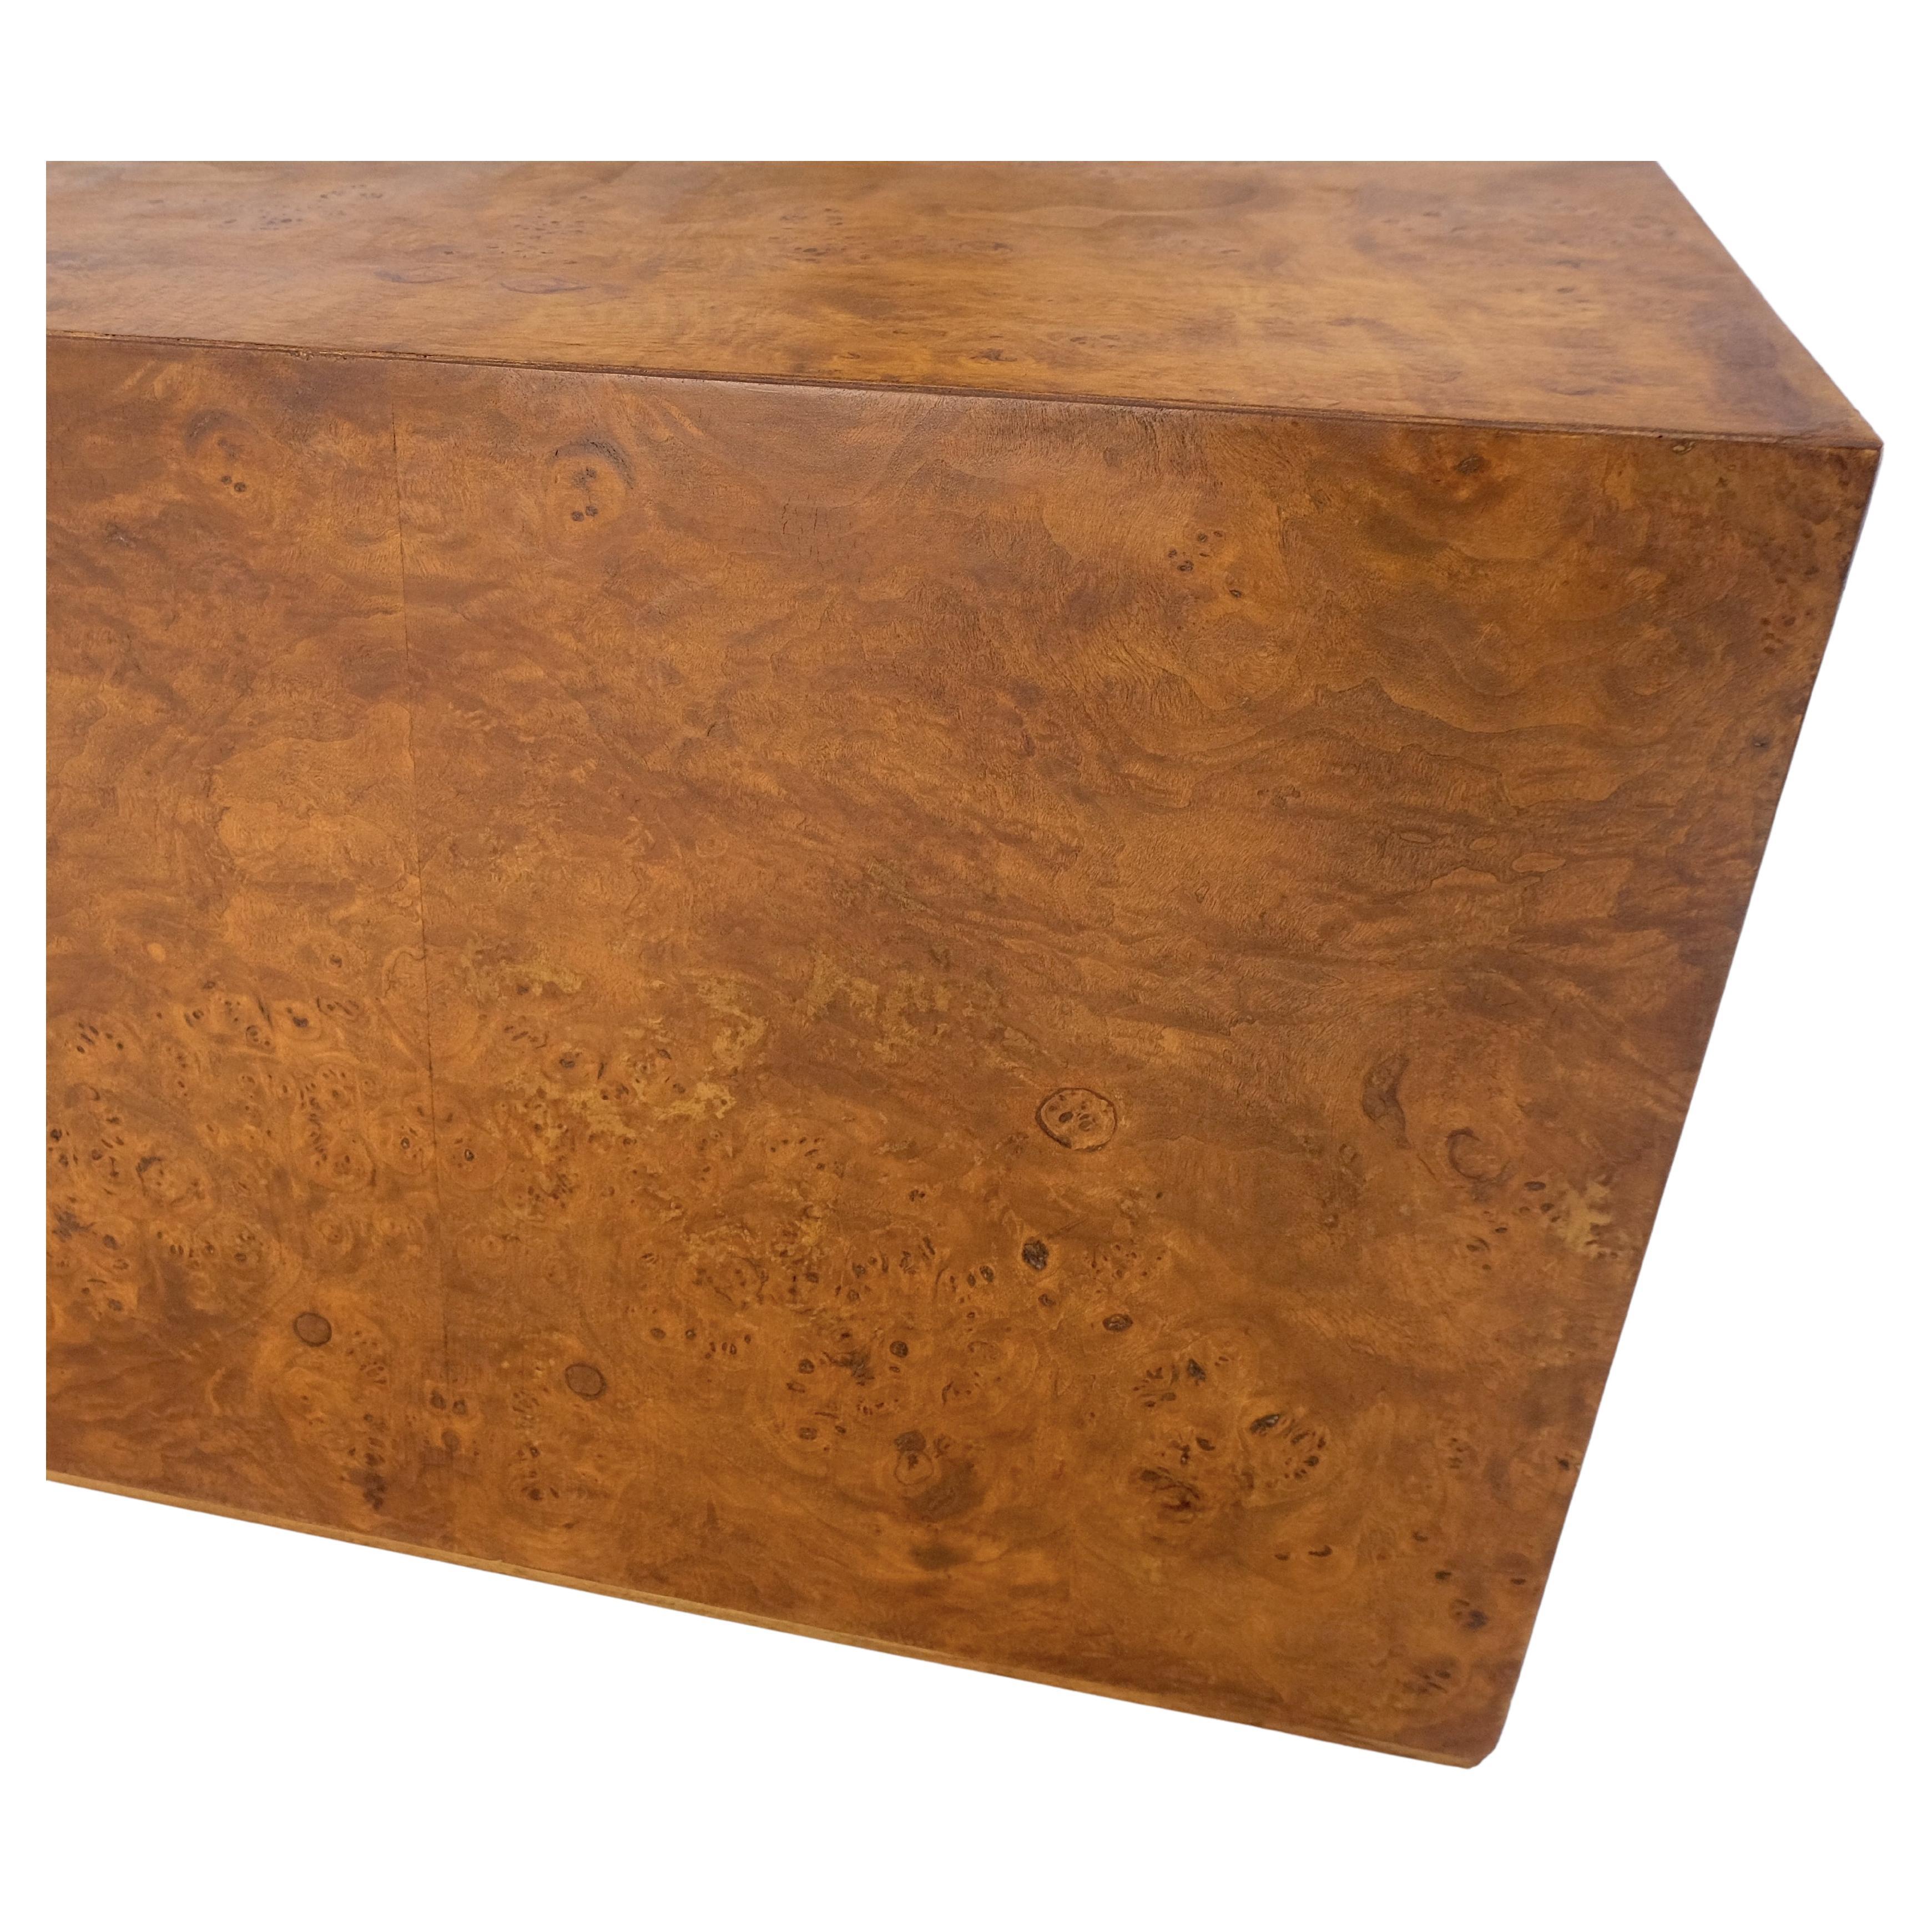 Lacquered Large Burl Wood Cube Shape Square Coffee Table Stand Milo Baughman atr. MINT!